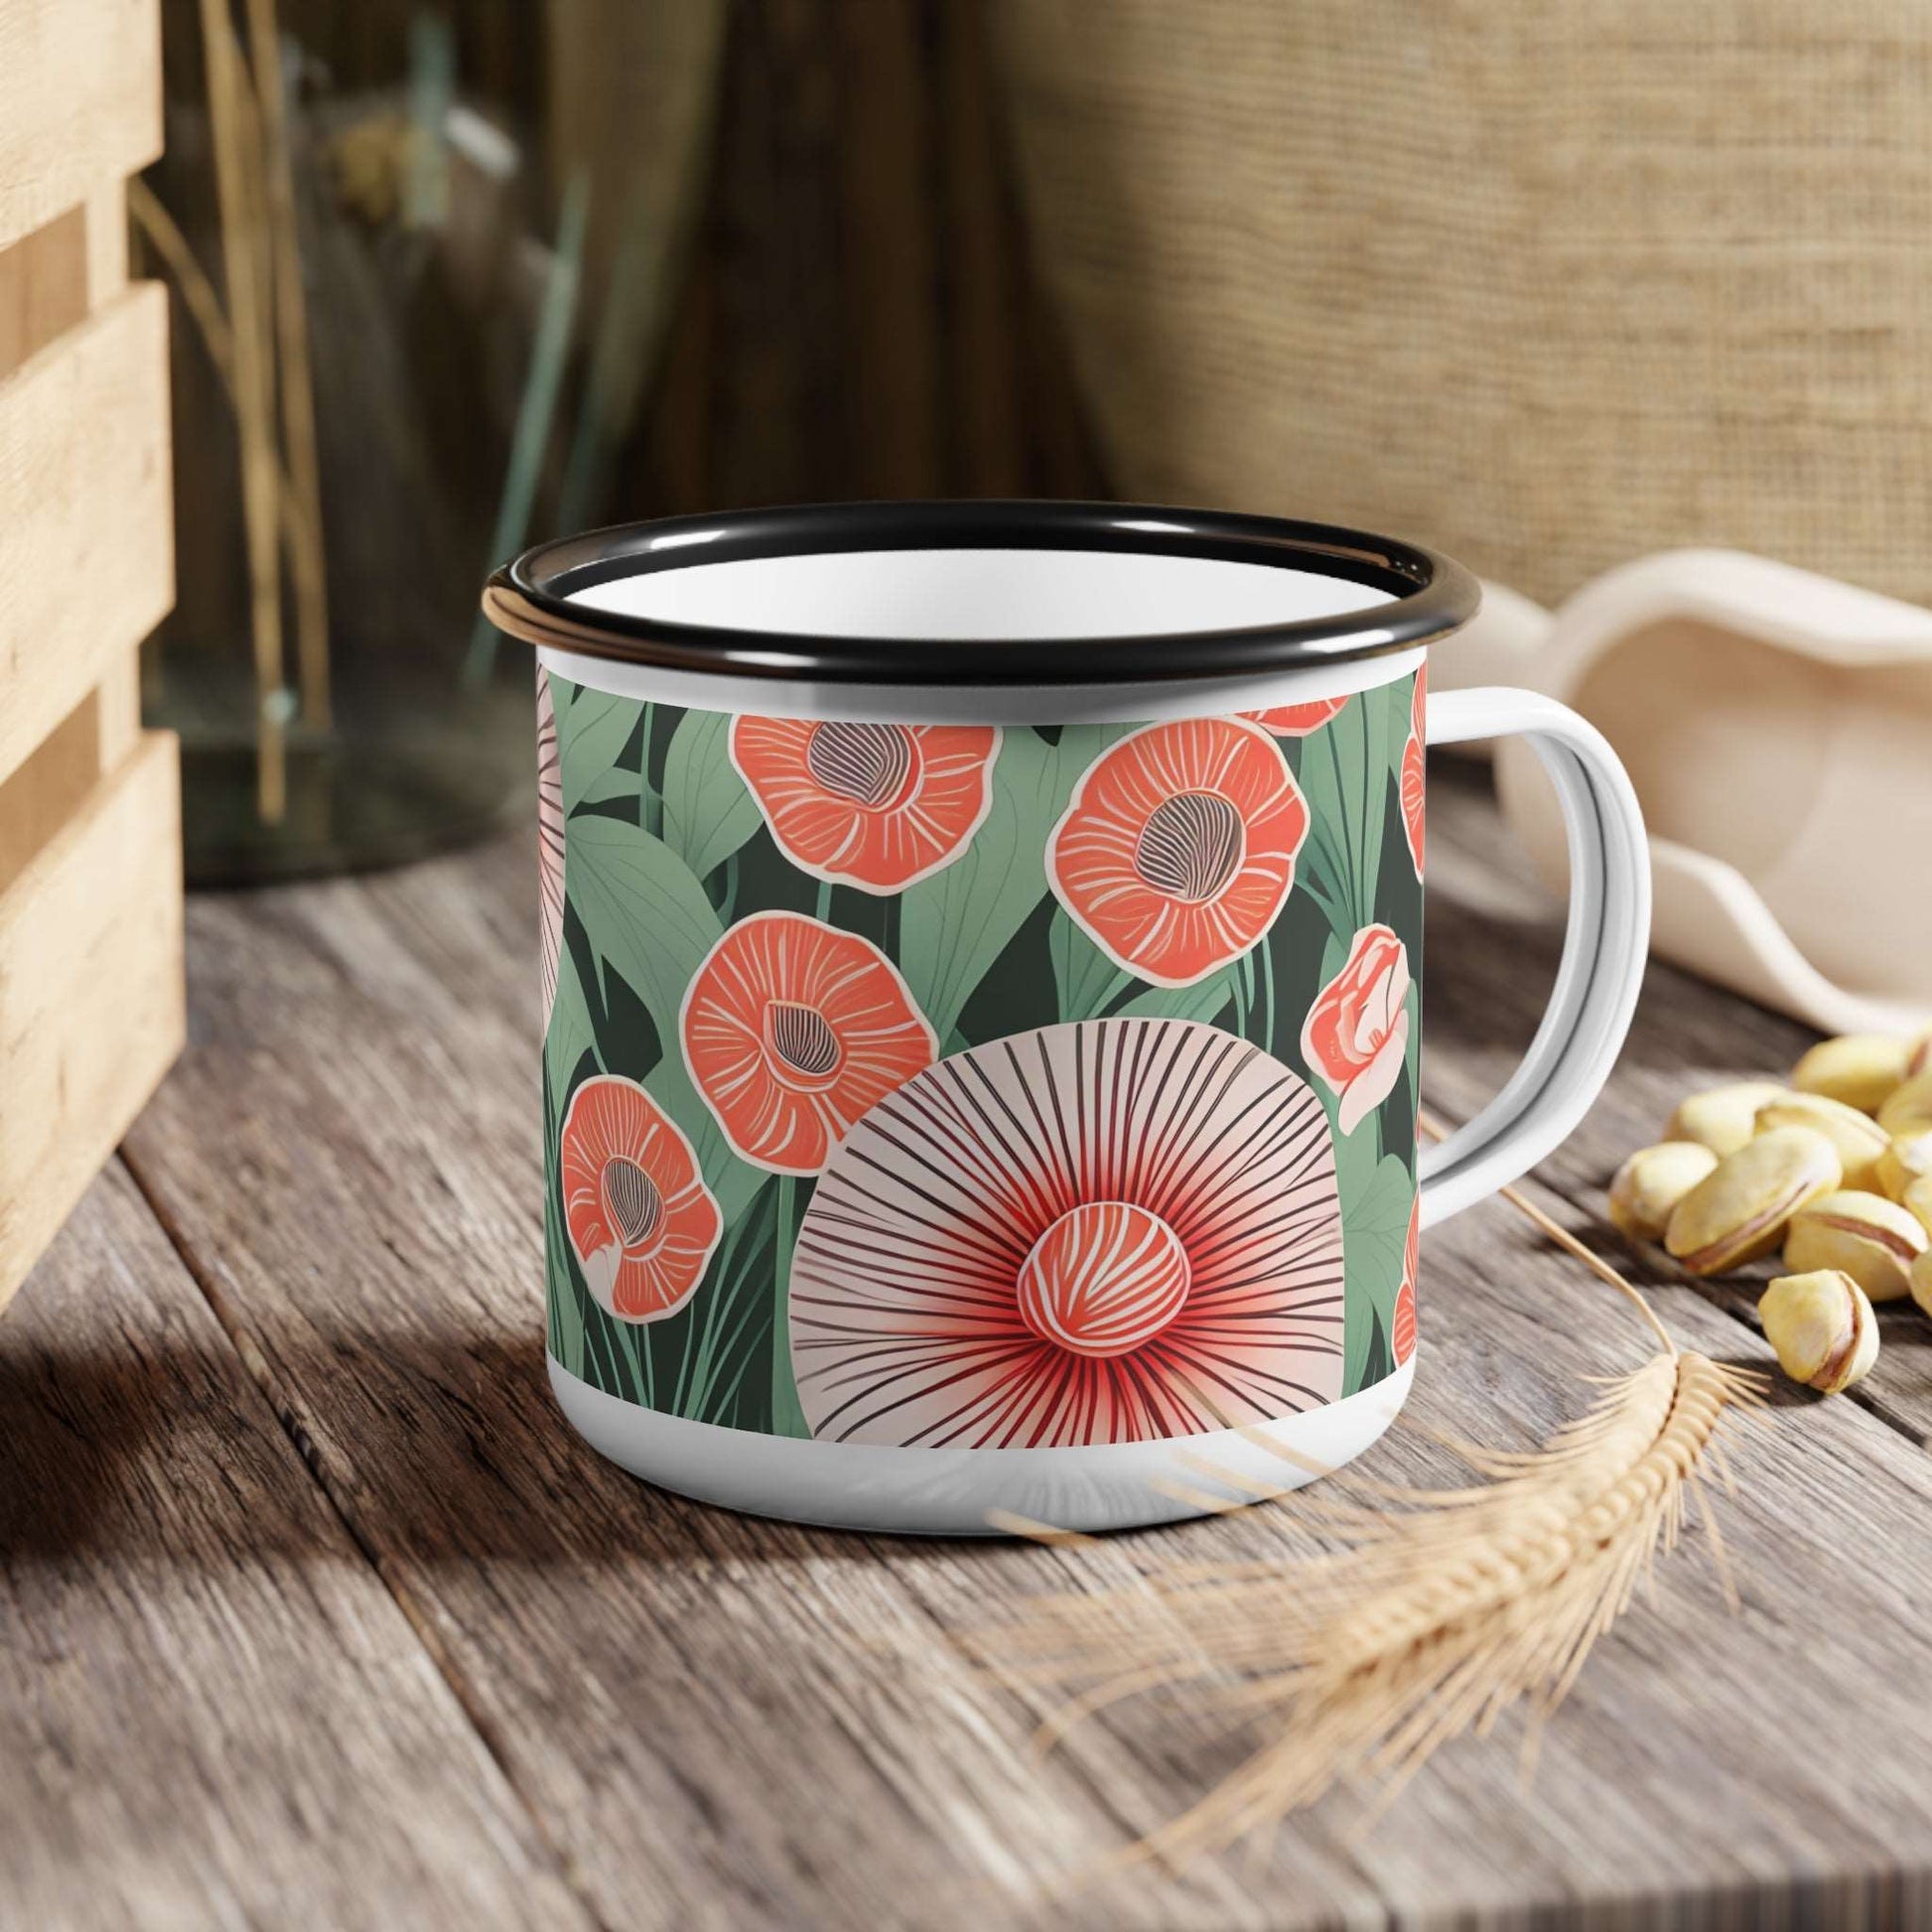 Enamel Camping Mug for Coffee, Tea, Hot Cocoa, Cereal, 12oz, Red Art Deco Flowers